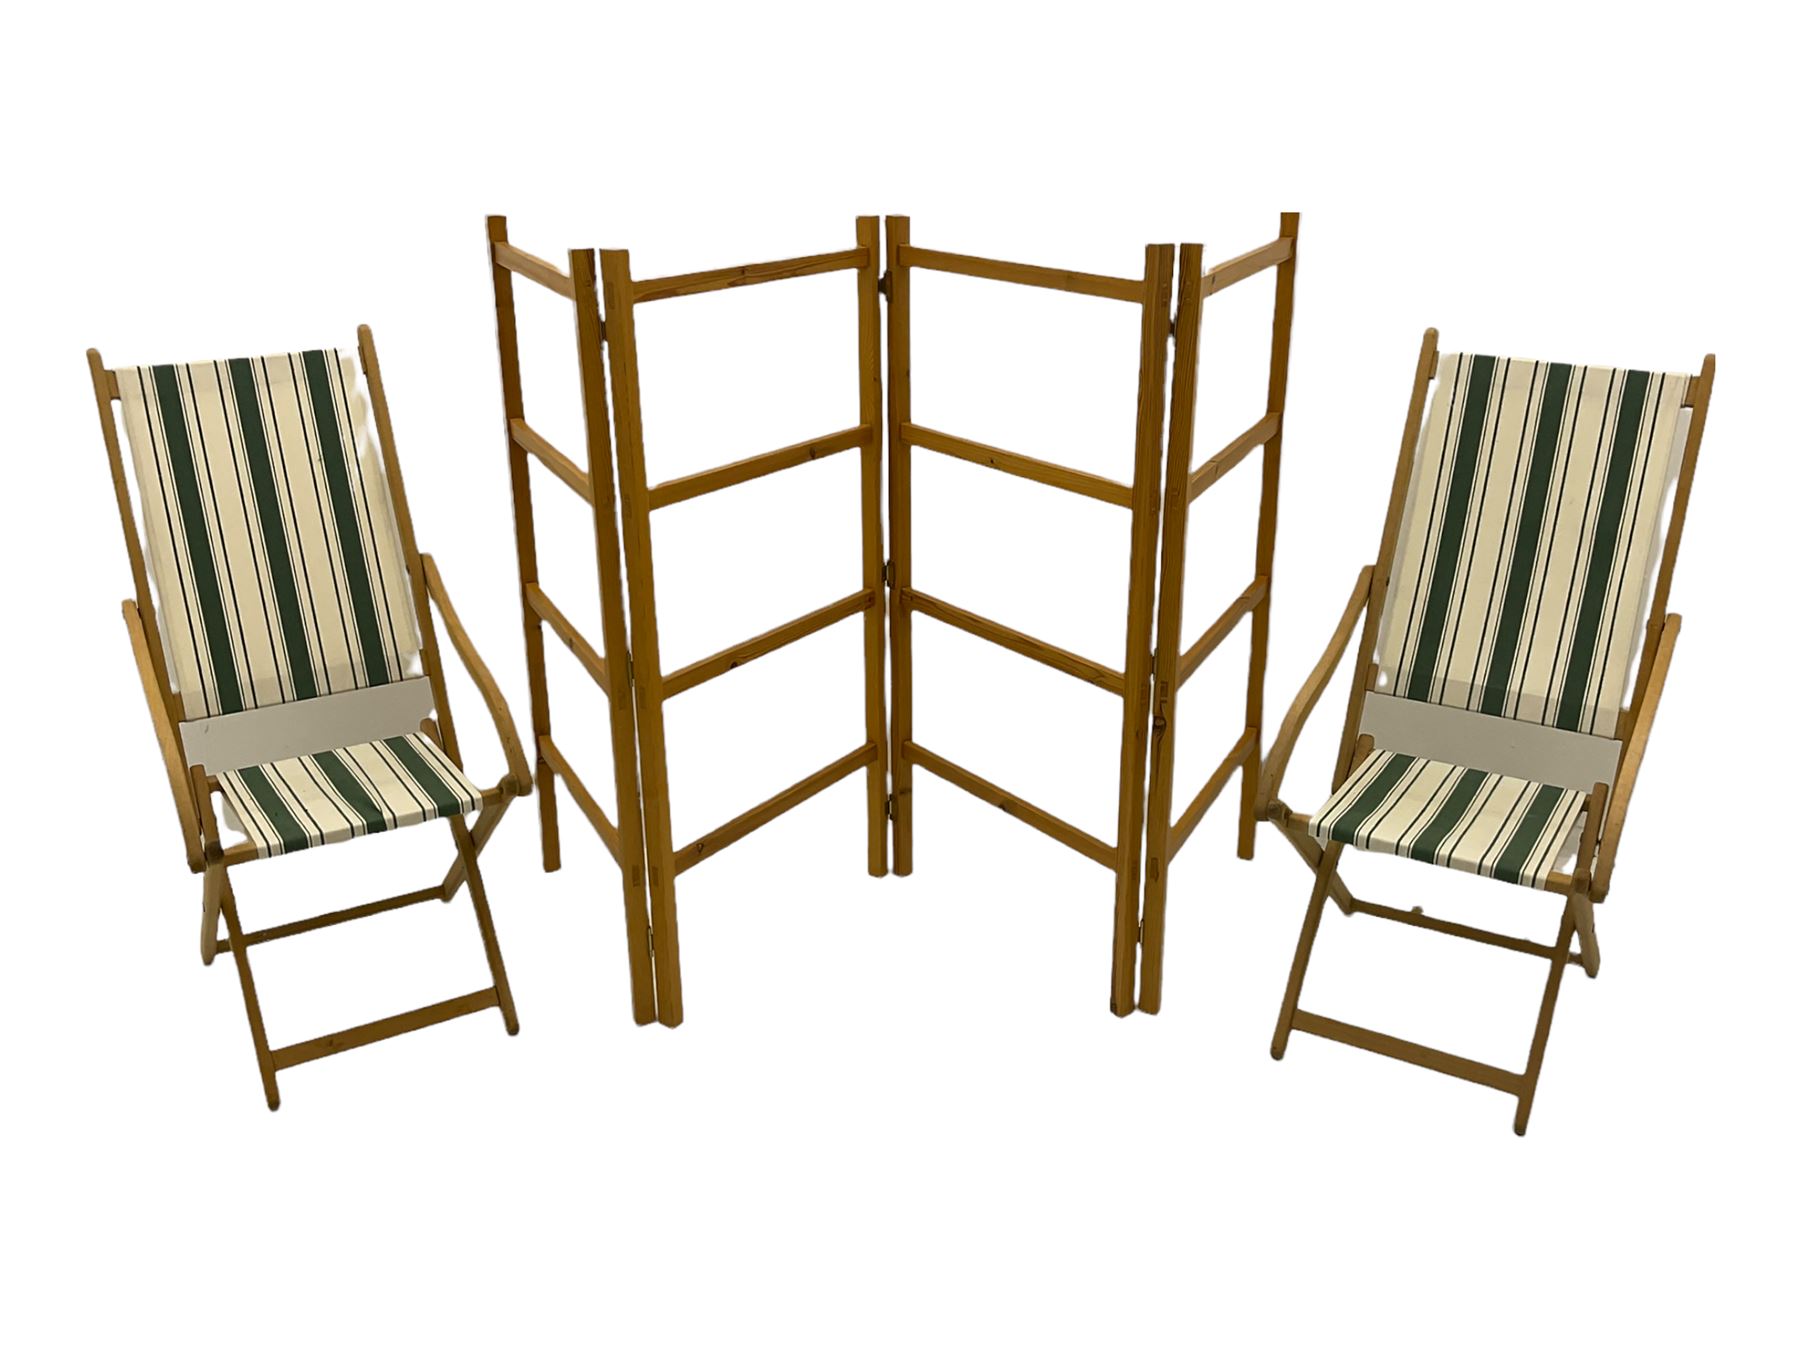 Two folding beech framed garden chairs with slung striped covers and a folding pine clothes horse